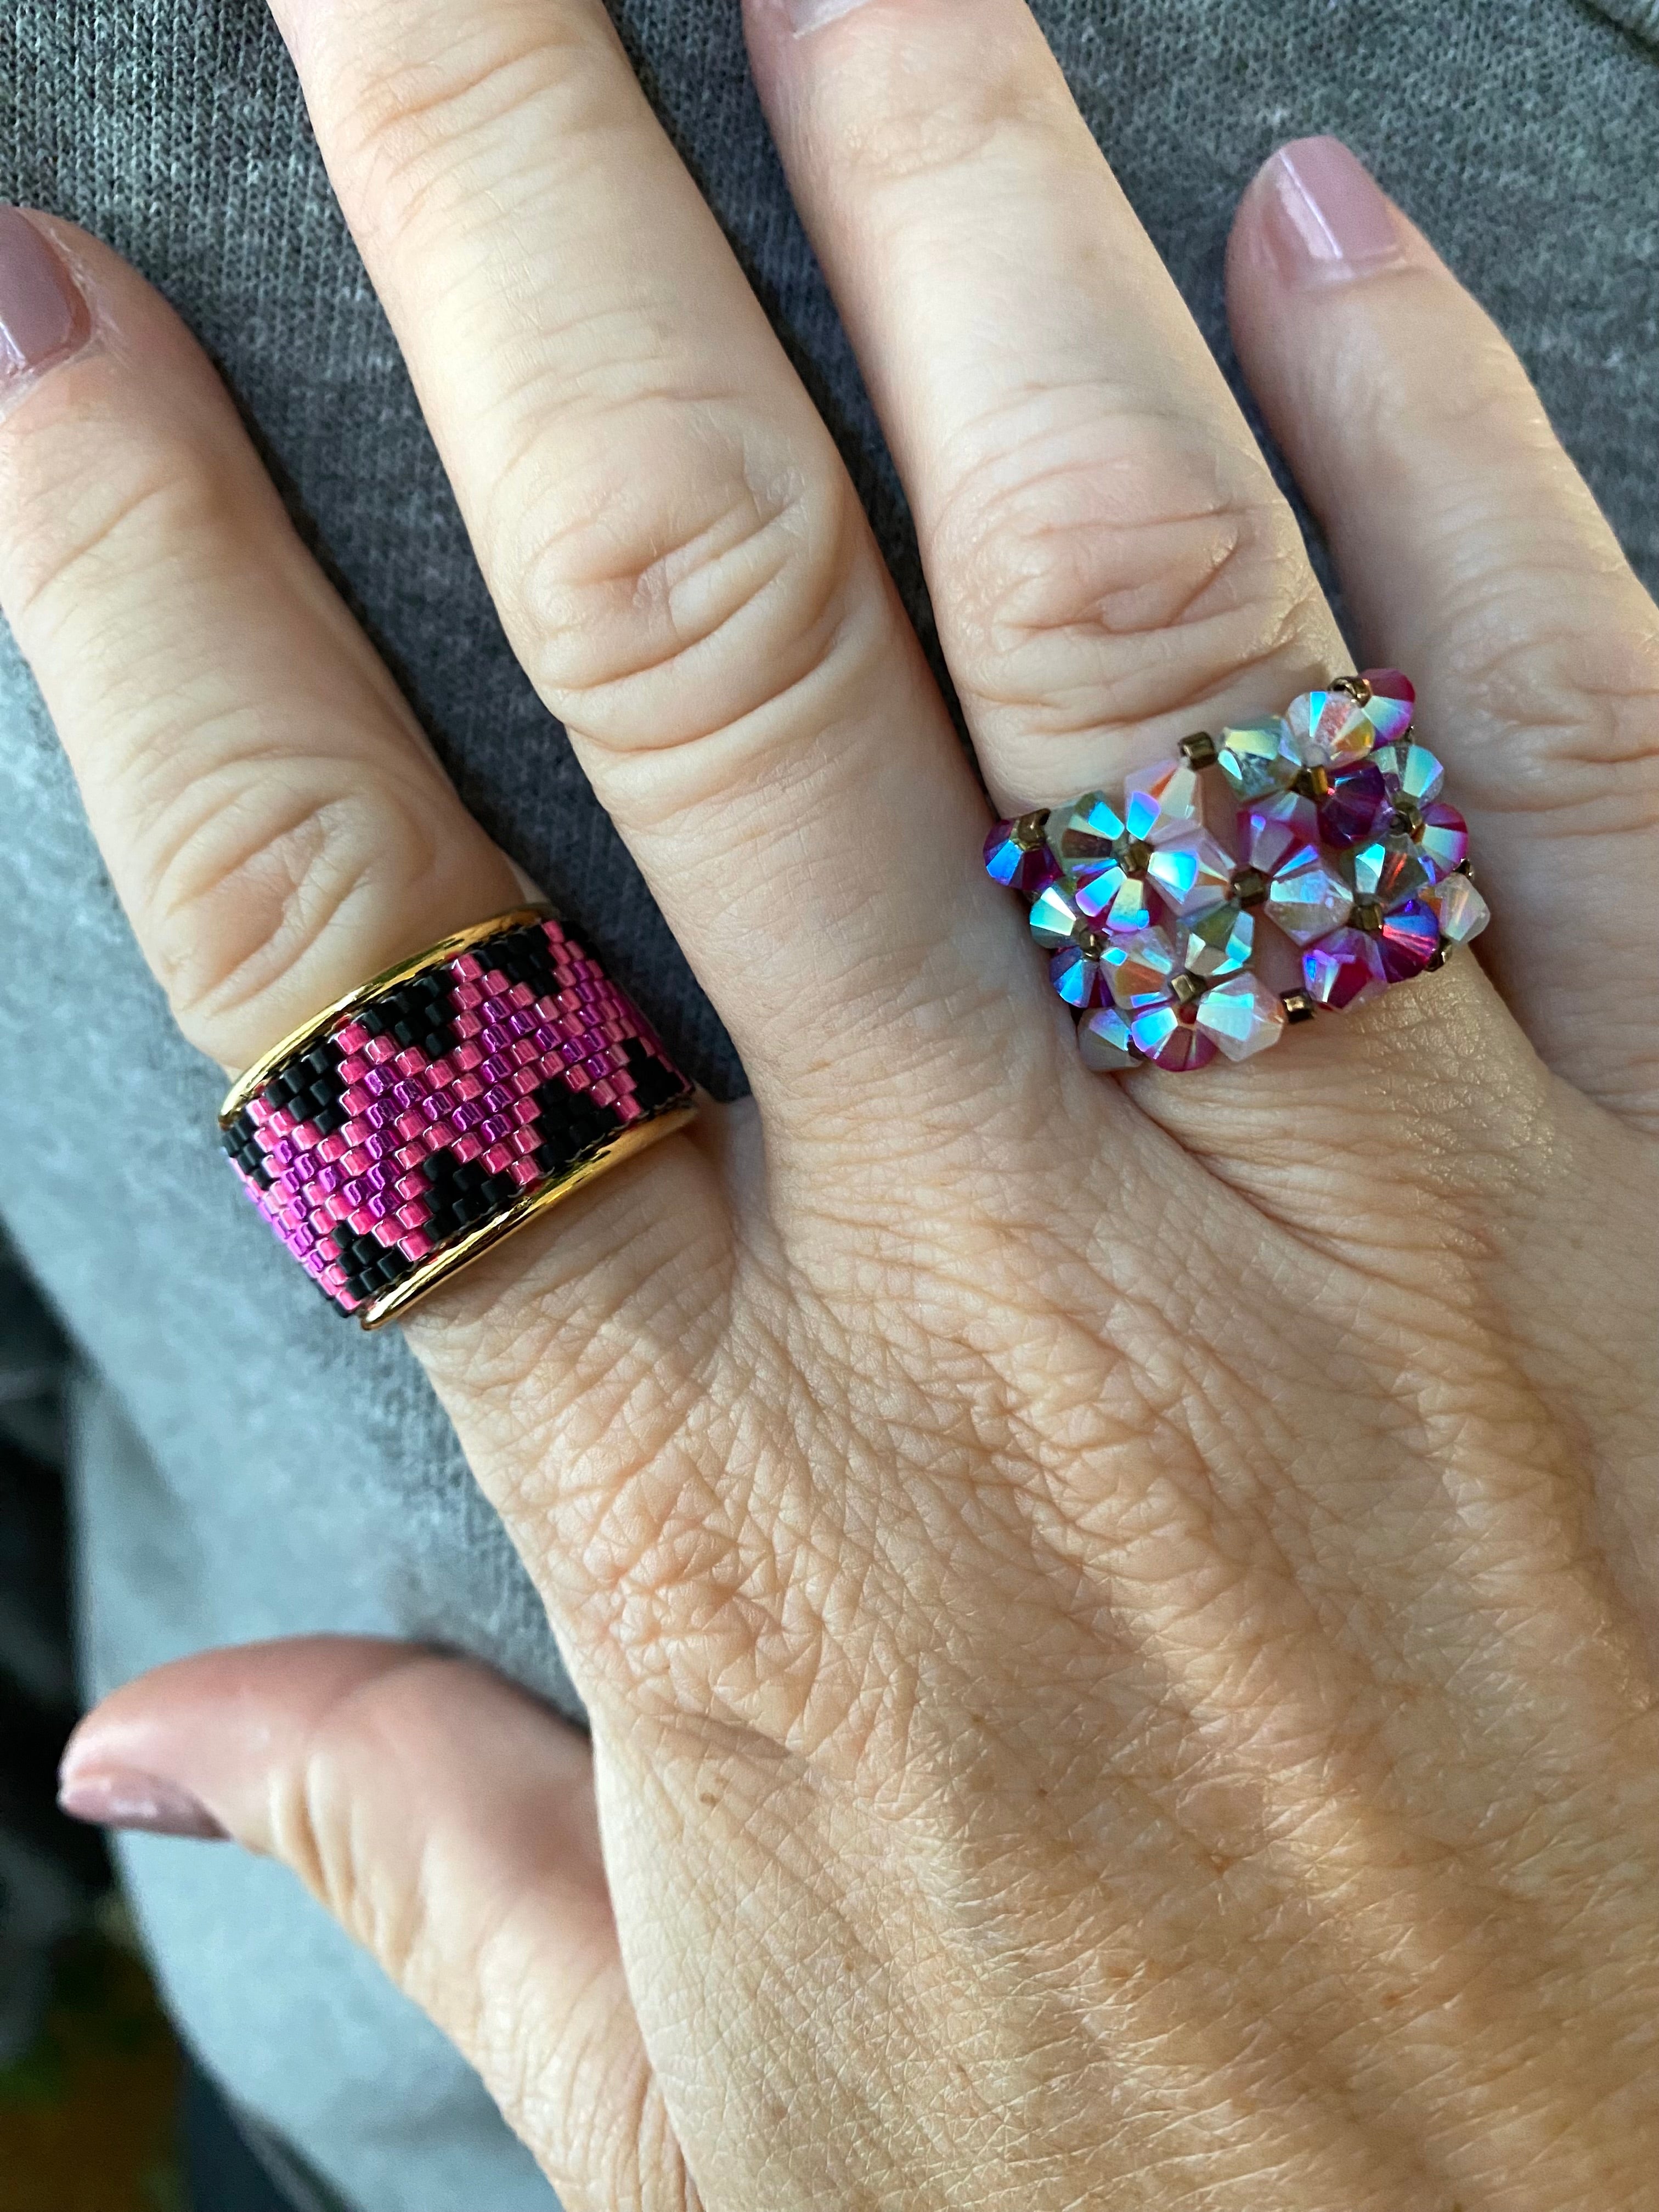 Beaded wide band ring - Black /Barbie Pink Chevron